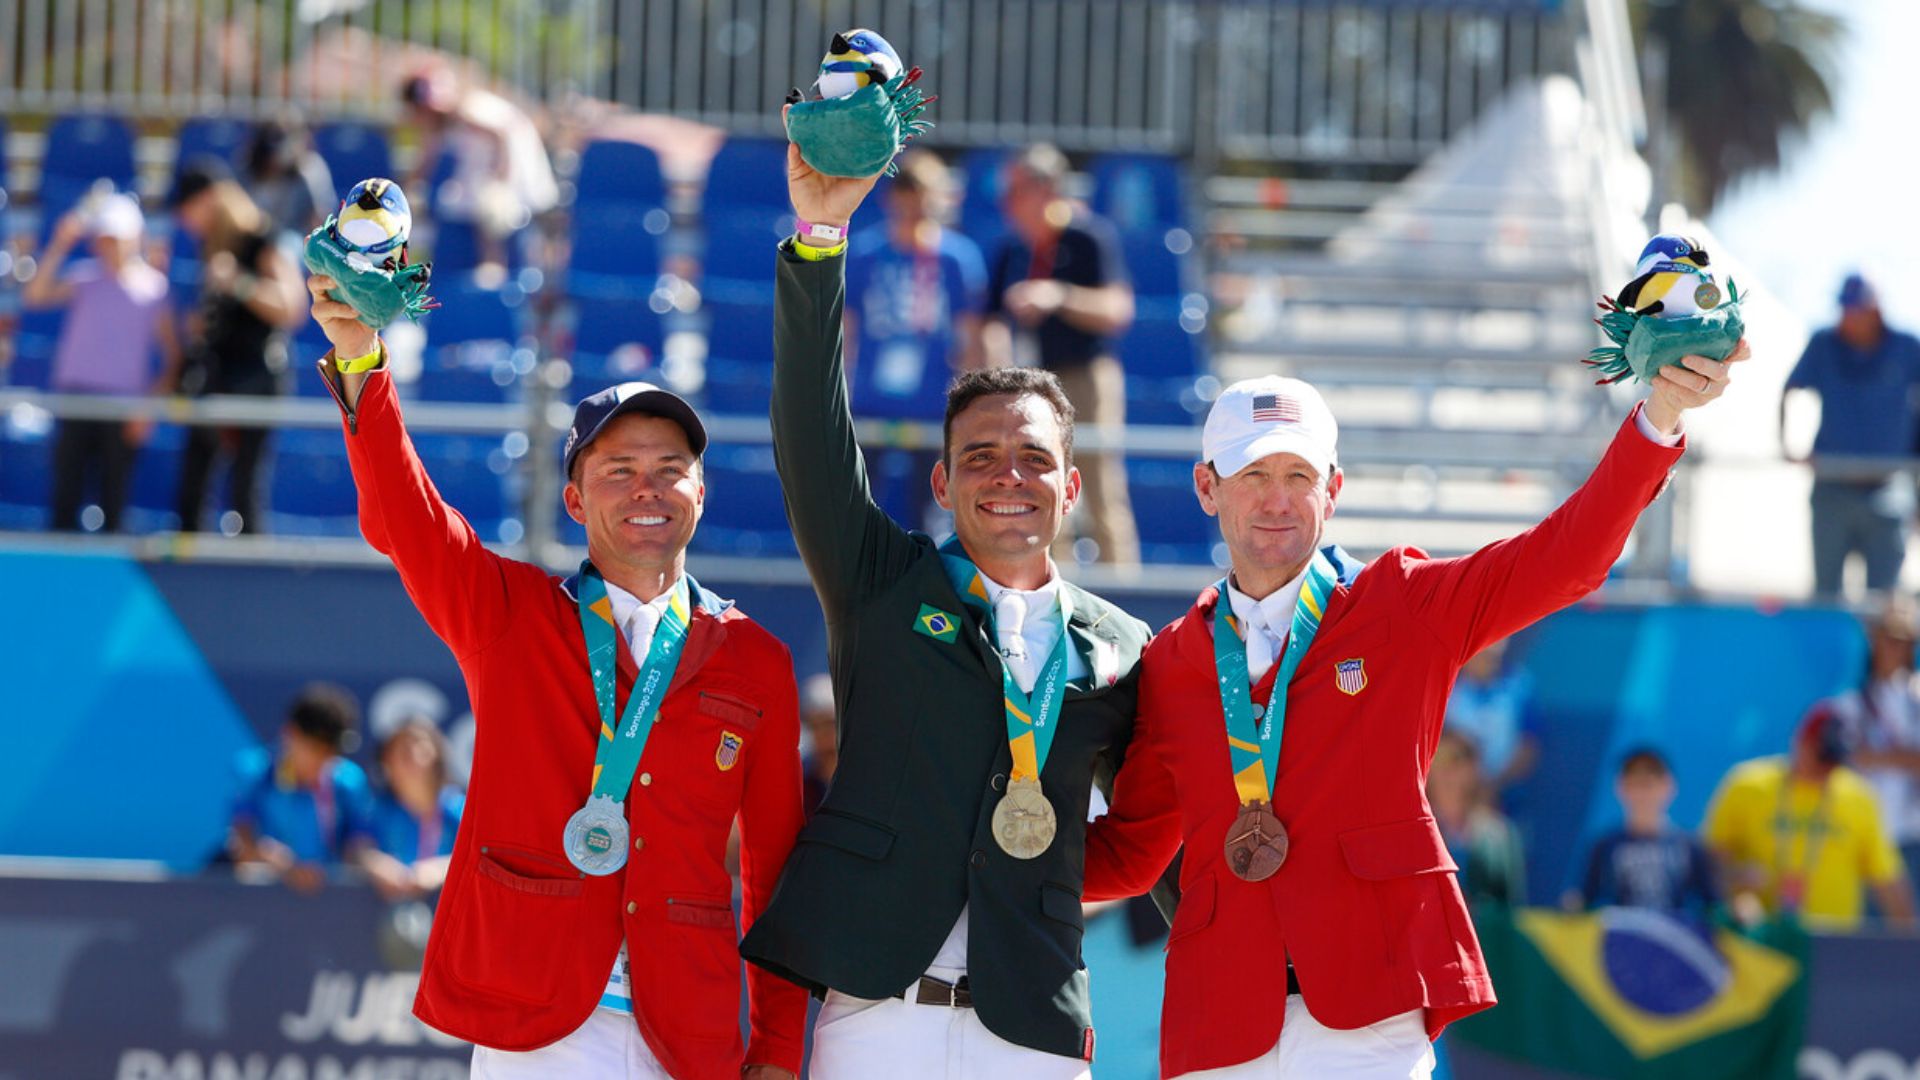 Equestrian Jumping: Brazil takes gold and USA secures silver and bronce